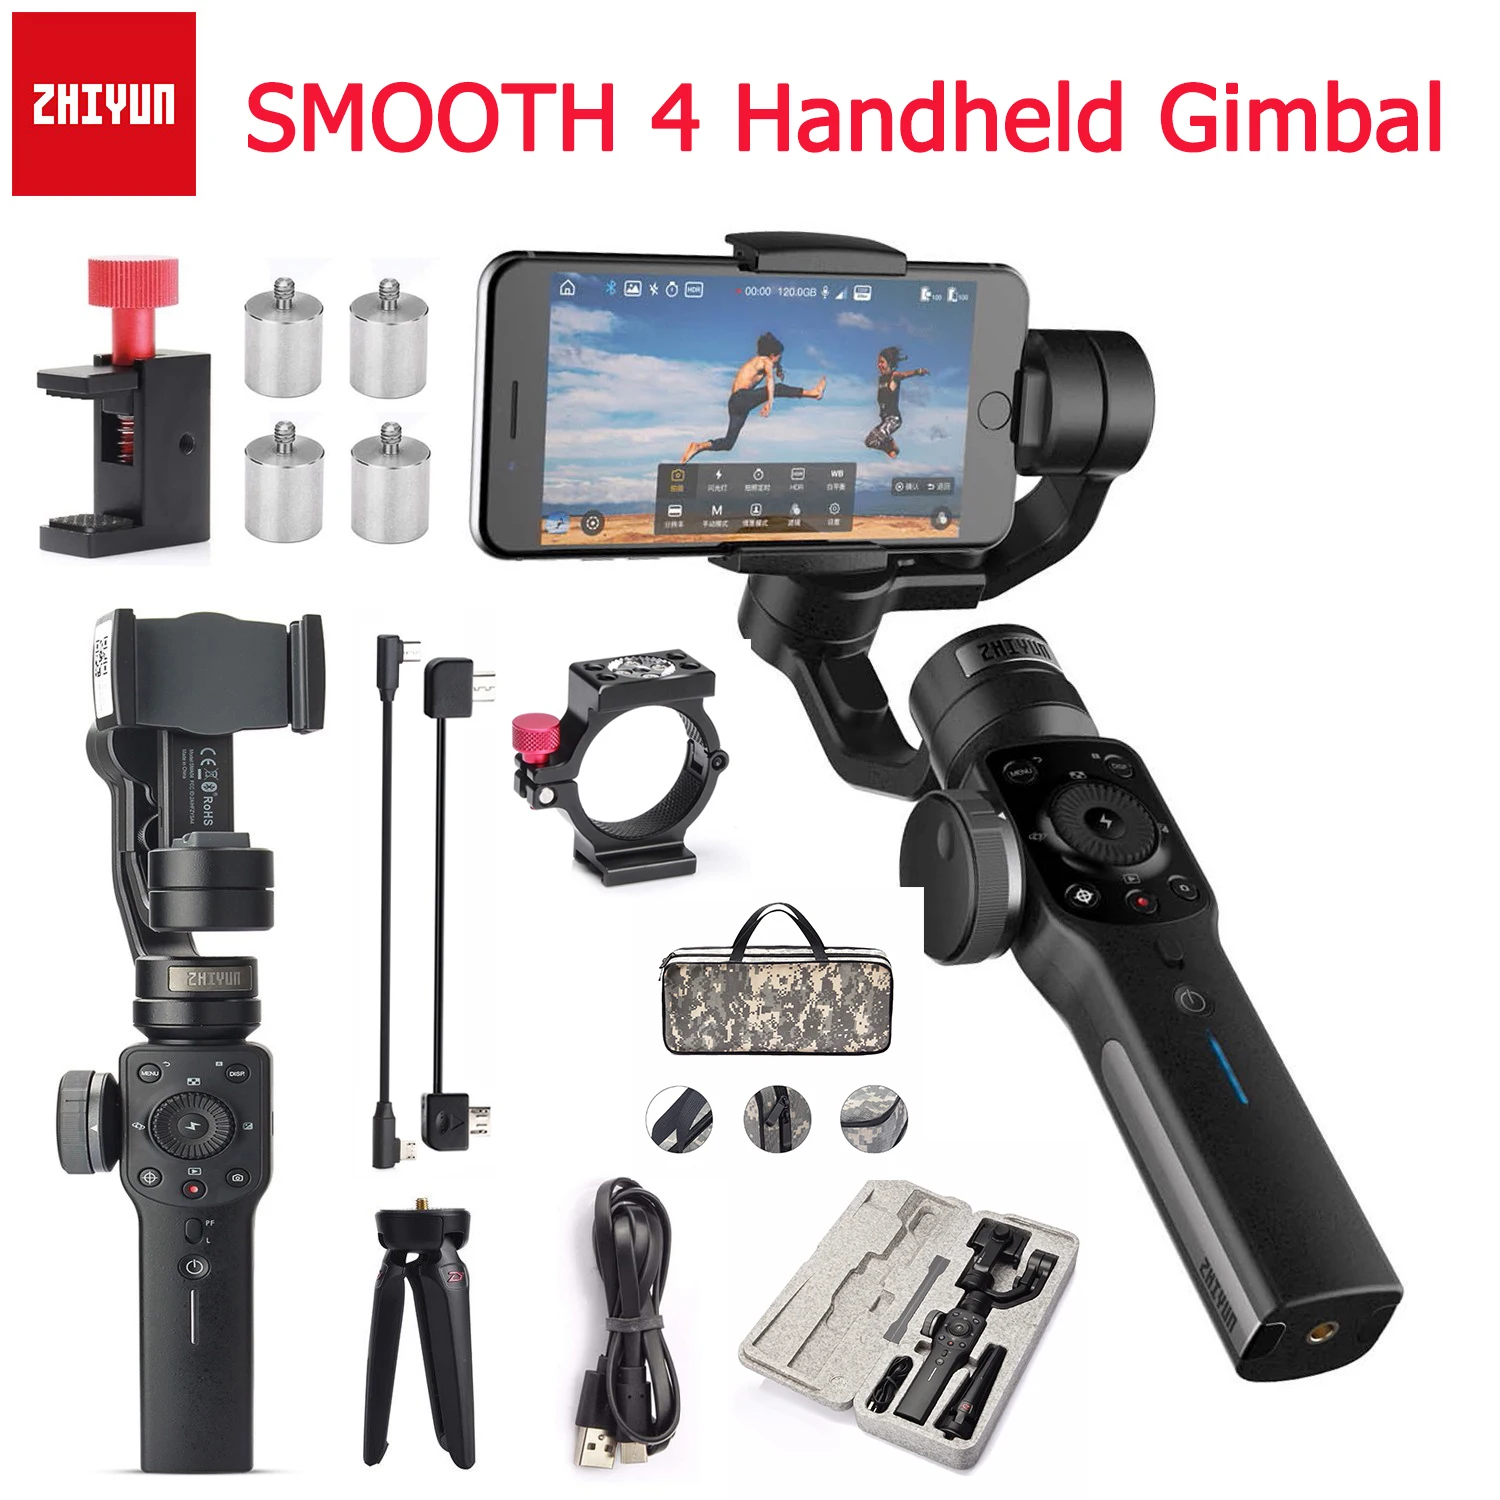 Zhiyun Smooth 4 3-Axis Handheld Smartphone Gimbal Stabilizer for iPhone Xs Max X 8 7& Samsung S9,S8 & Action Camera Vlog Live